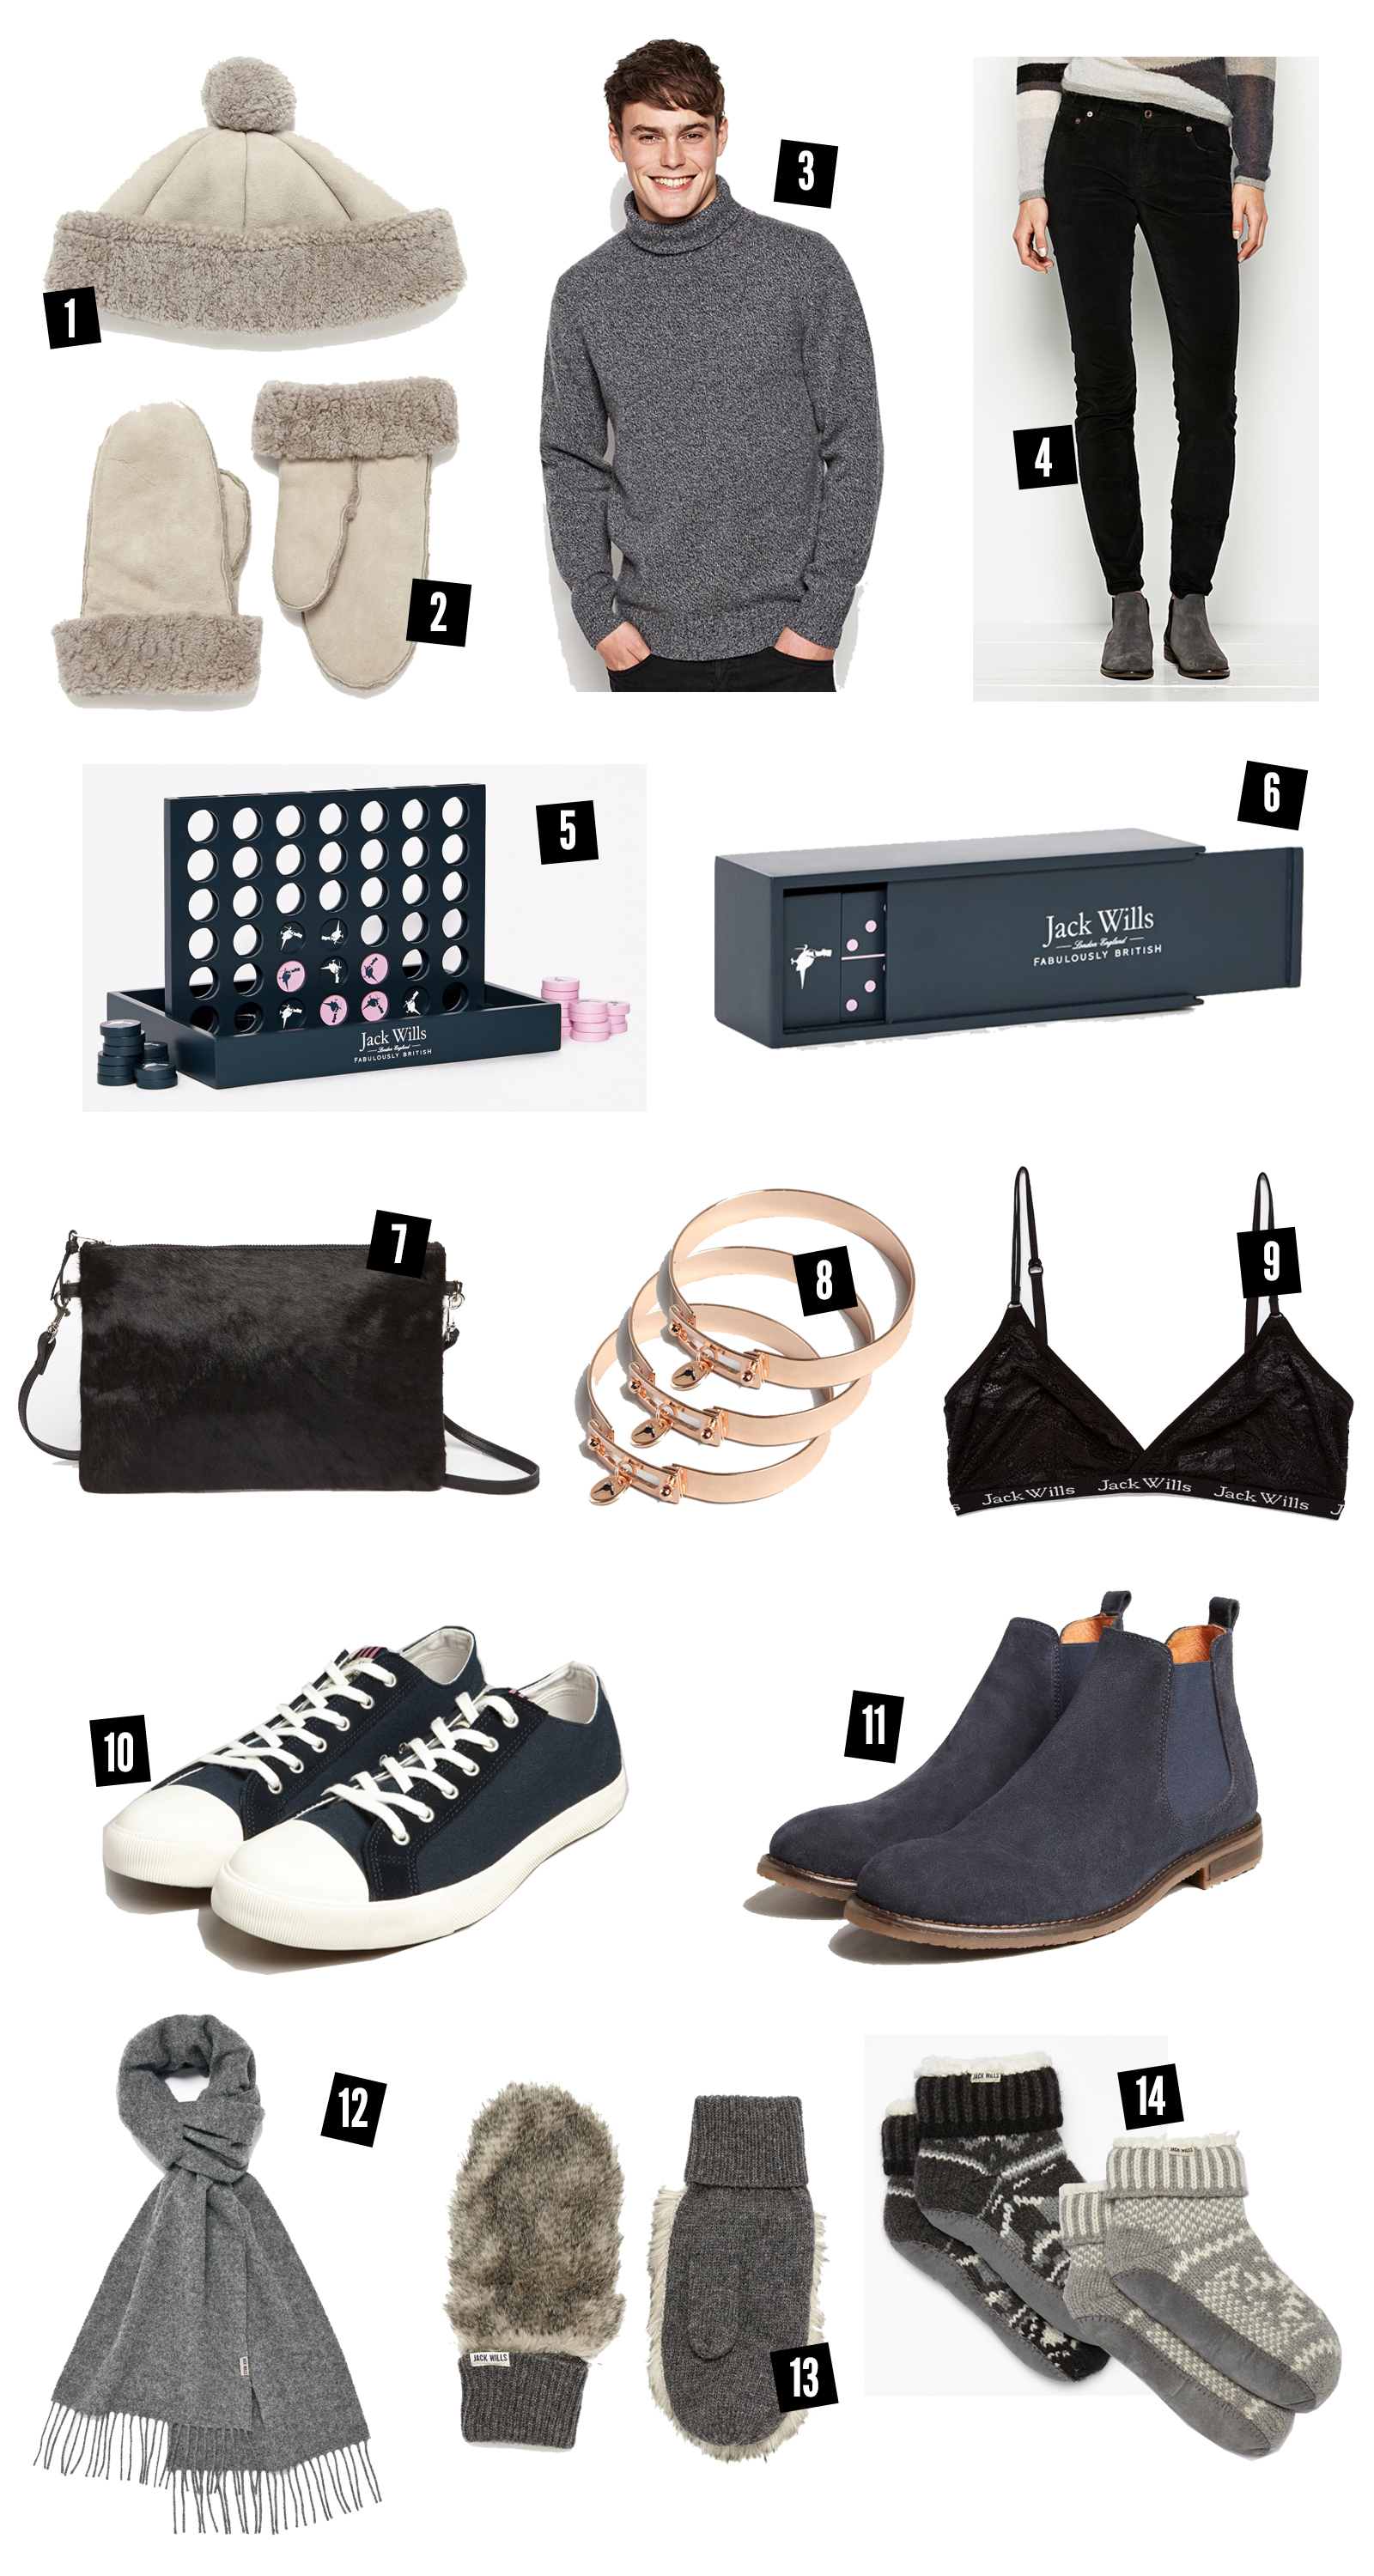 JACK WILLS GIFT GUIDE